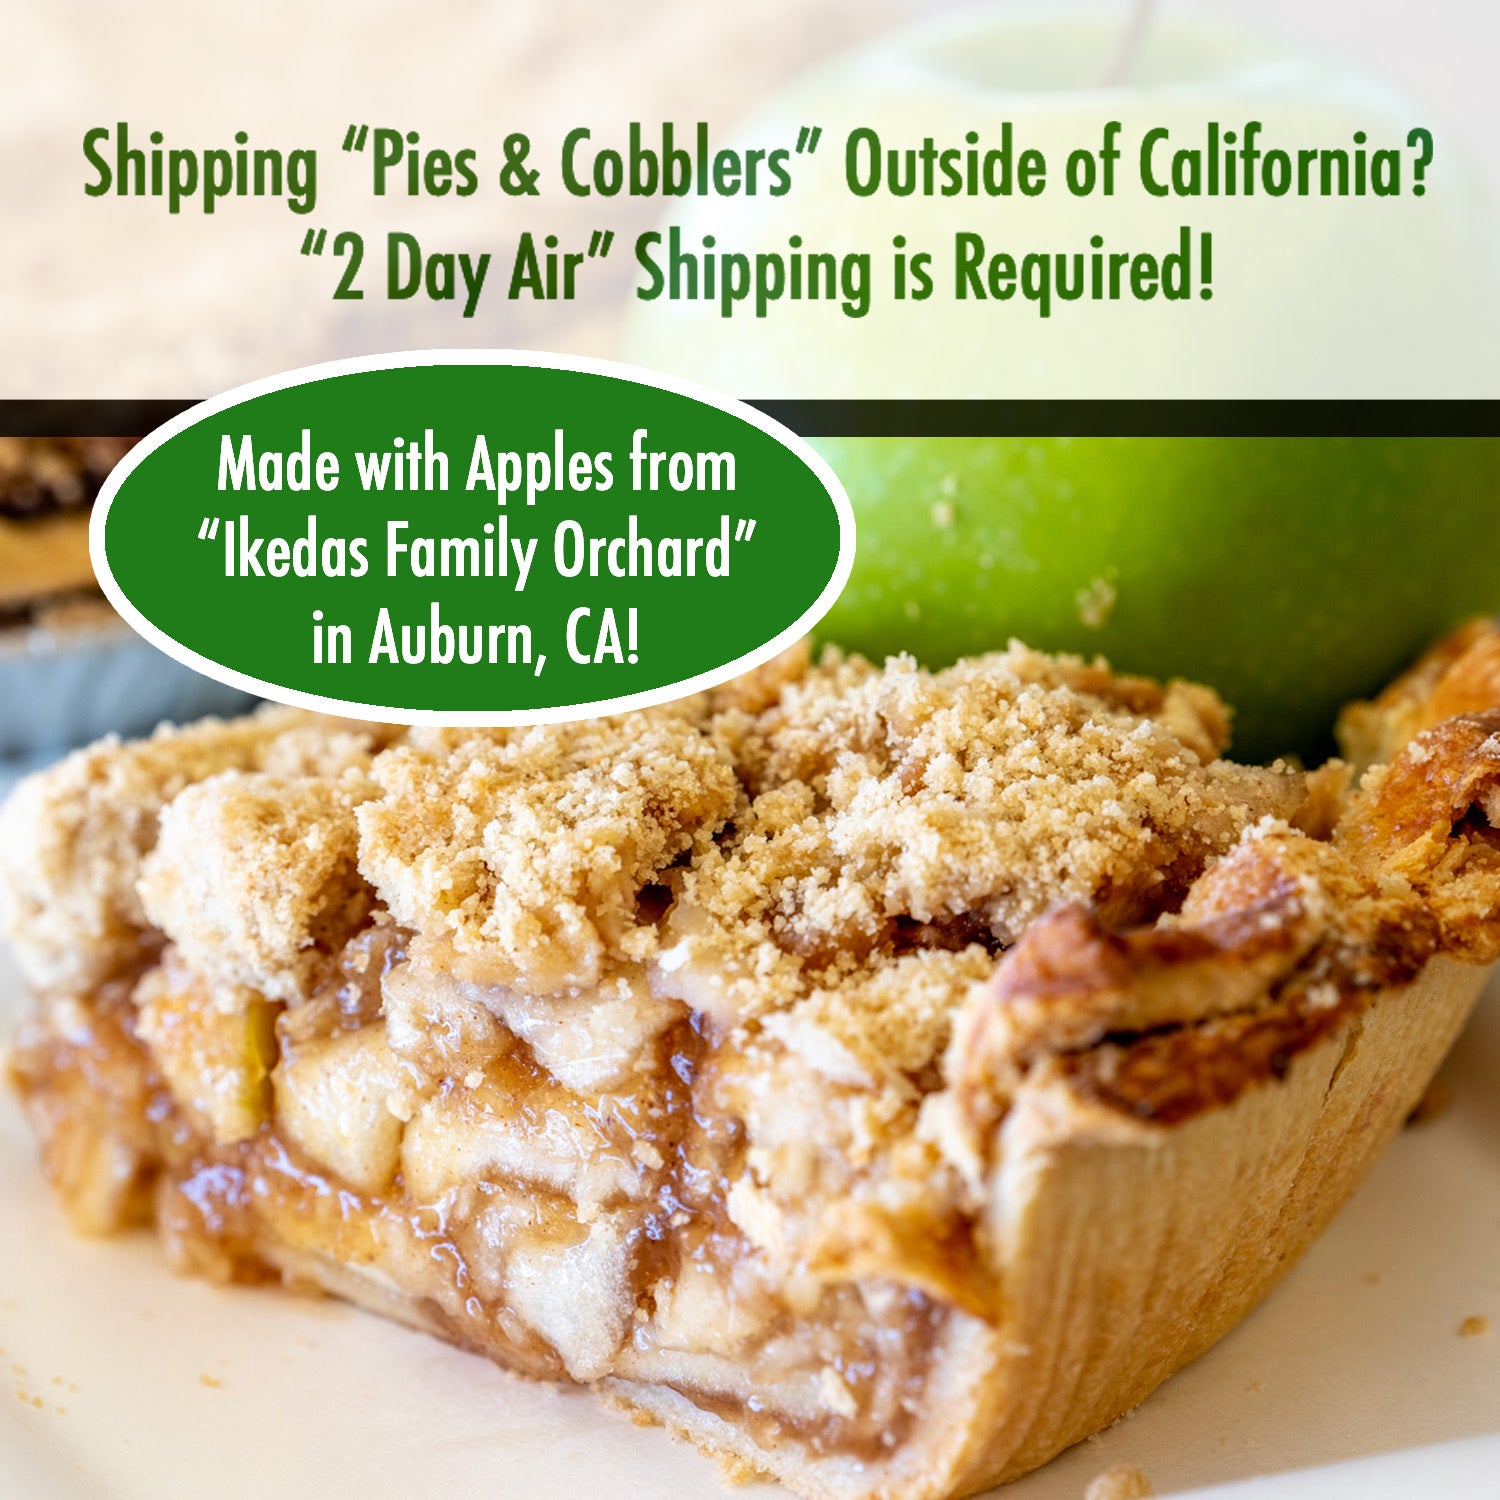 dutch apple cobbler, if shipping outside of california, 2 day air shipping required; made with ikedas orchard apples from auburn, california